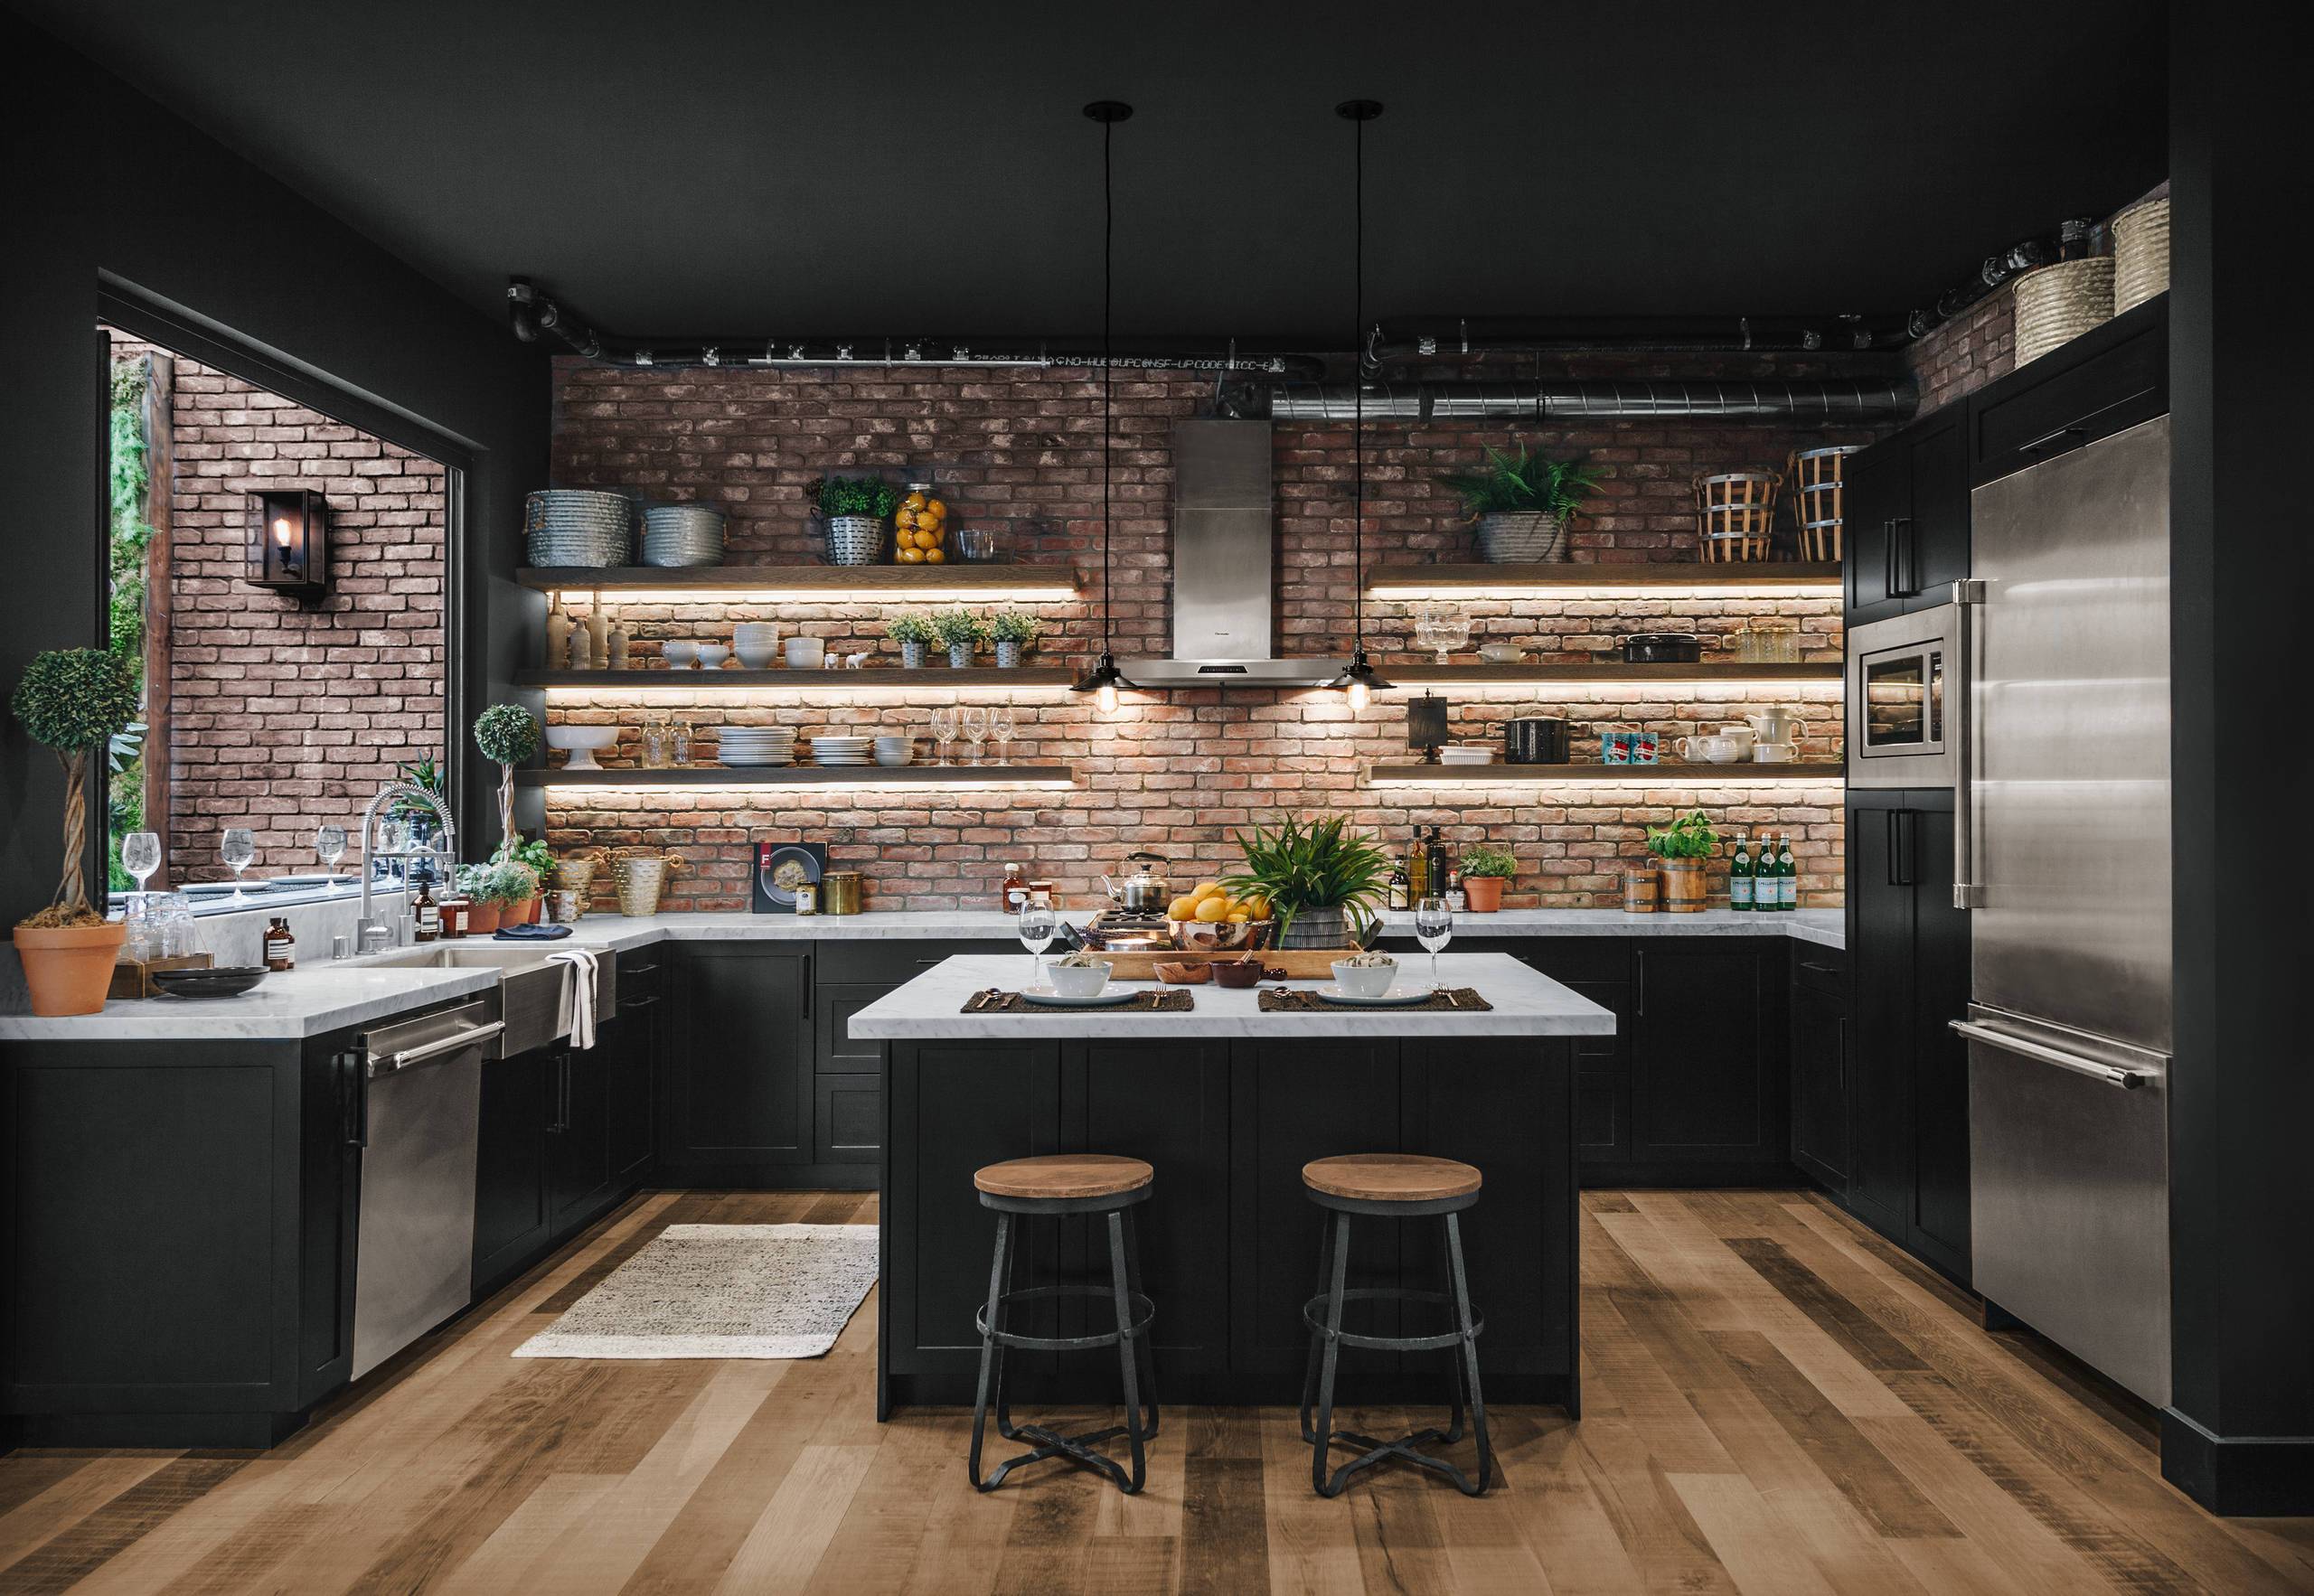 Industrial and rustic style (from Houzz)